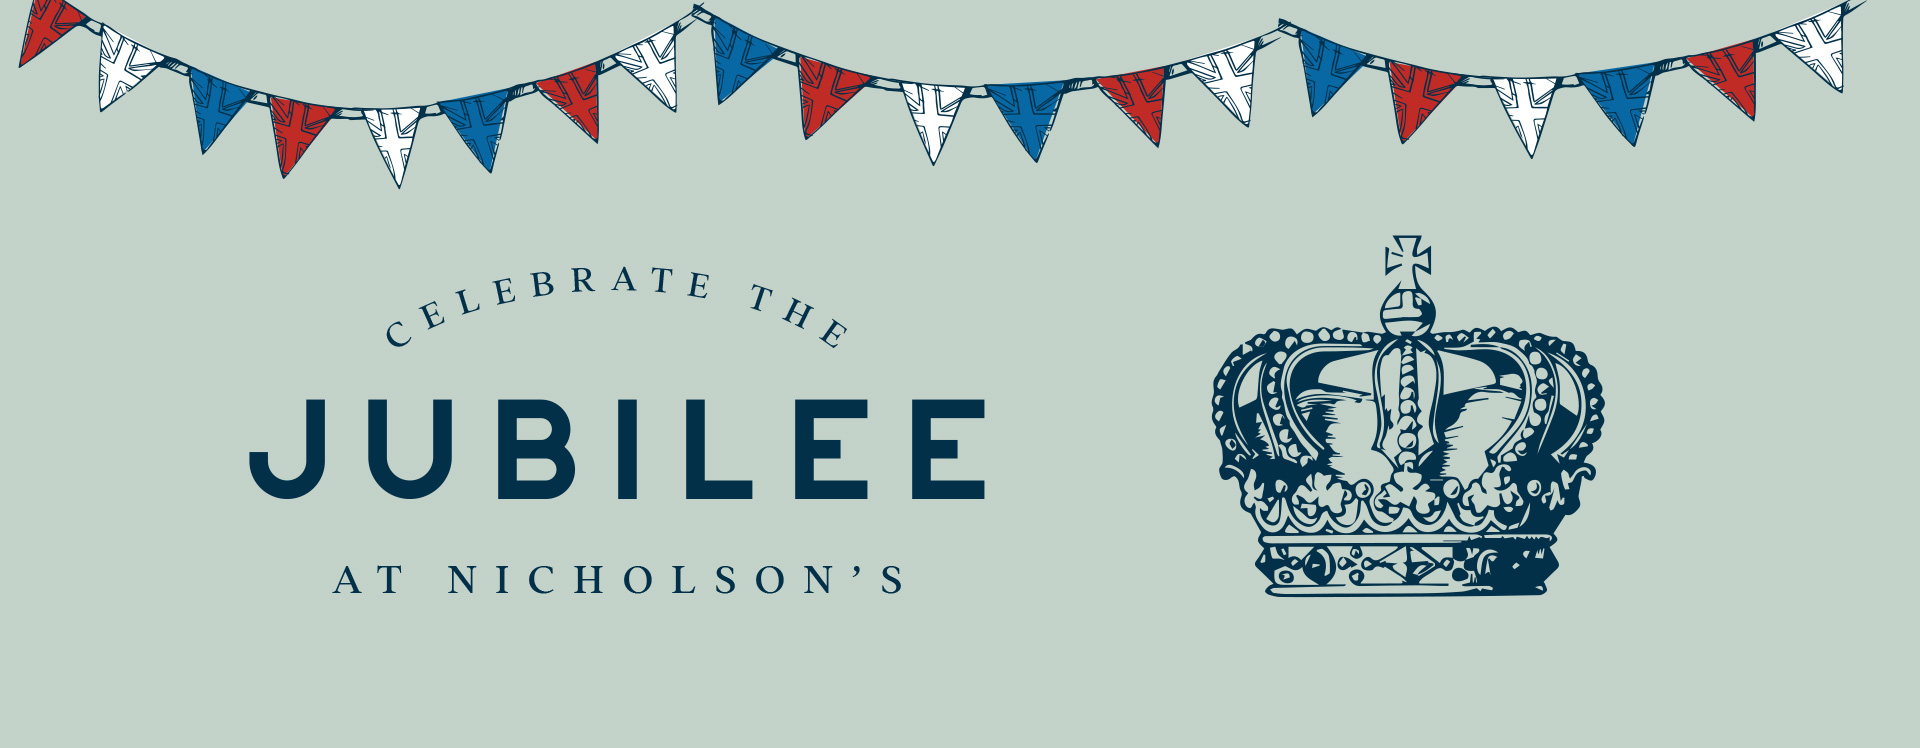 Jubilee at The Conan Doyle